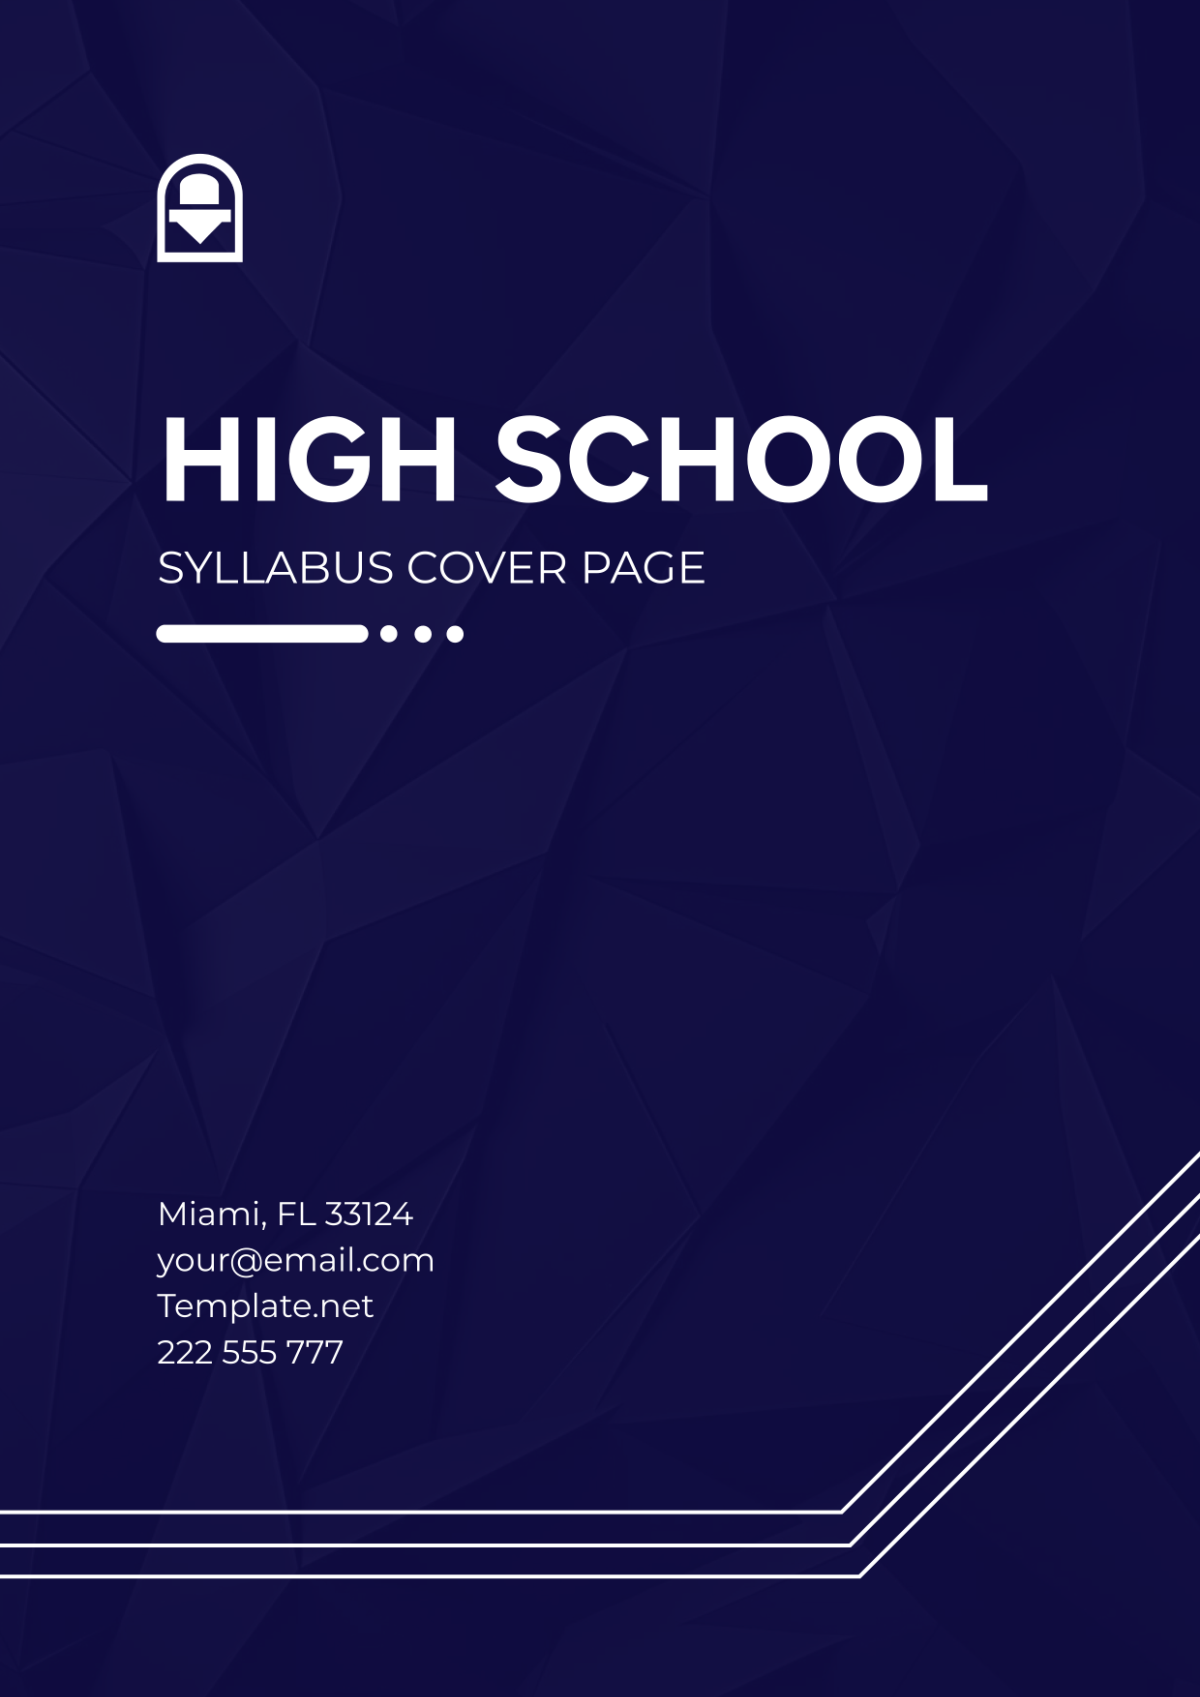 High School Syllabus Cover Page Template